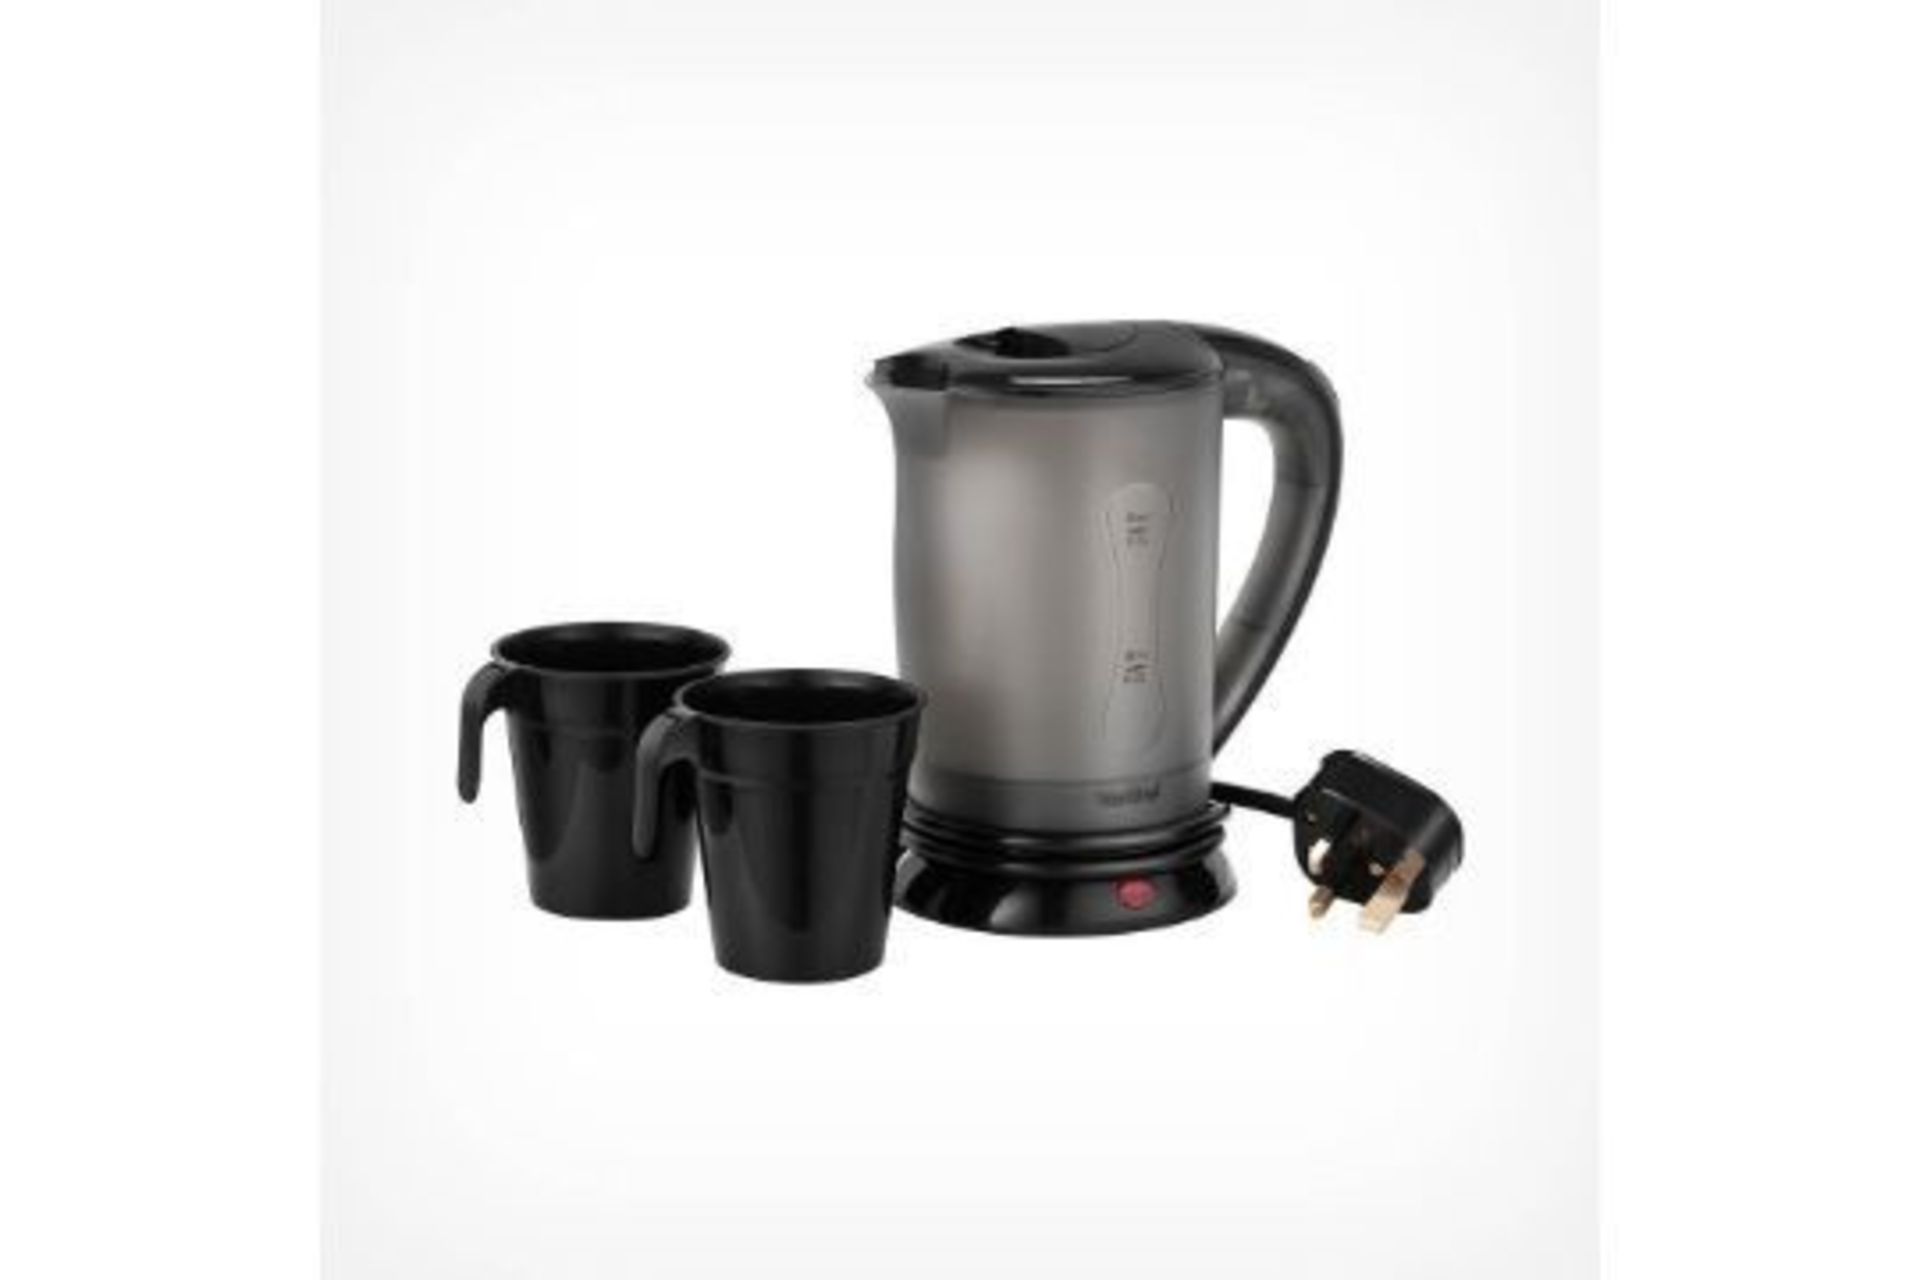 Travel Kettle with 2 Cups - PW. Hot drinks on the goEnjoy a delicious hot brew wherever you are with